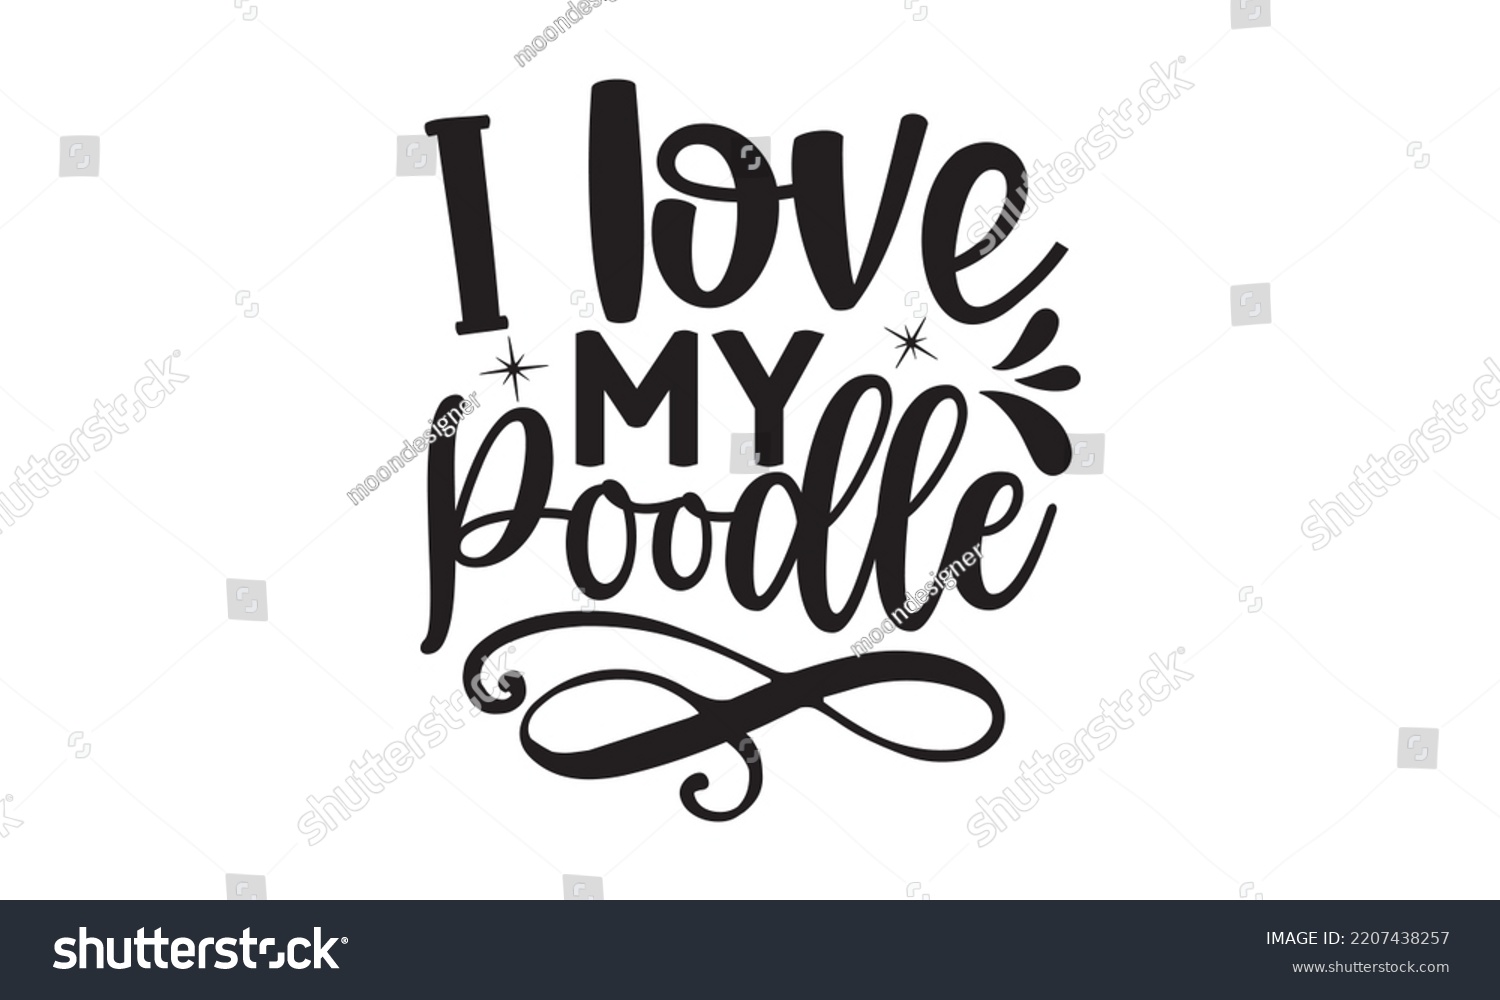 SVG of I love my Poodle - poodles T-shirt and SVG Design, Dog lover typography t shirt design gift for women, can you download this Design, Cutting and Silhouette Design, EPS 10 svg